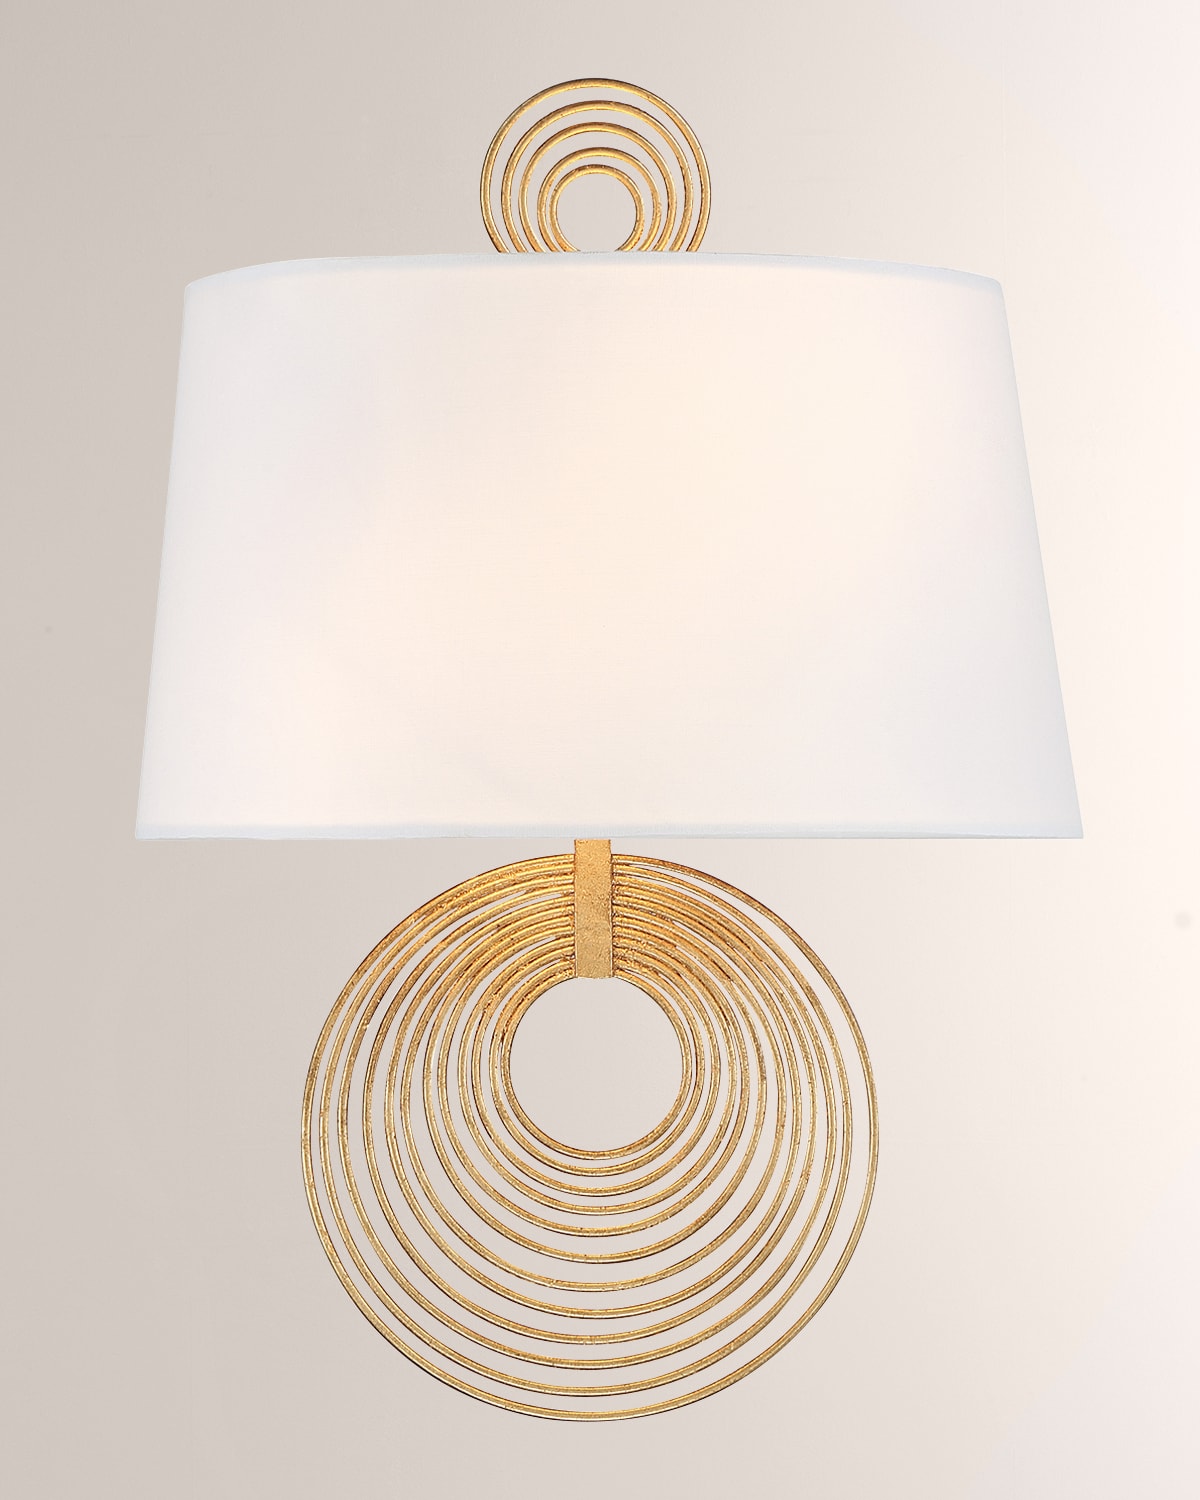 Crystorama Doral 2-light Ceiling Mount In Gold